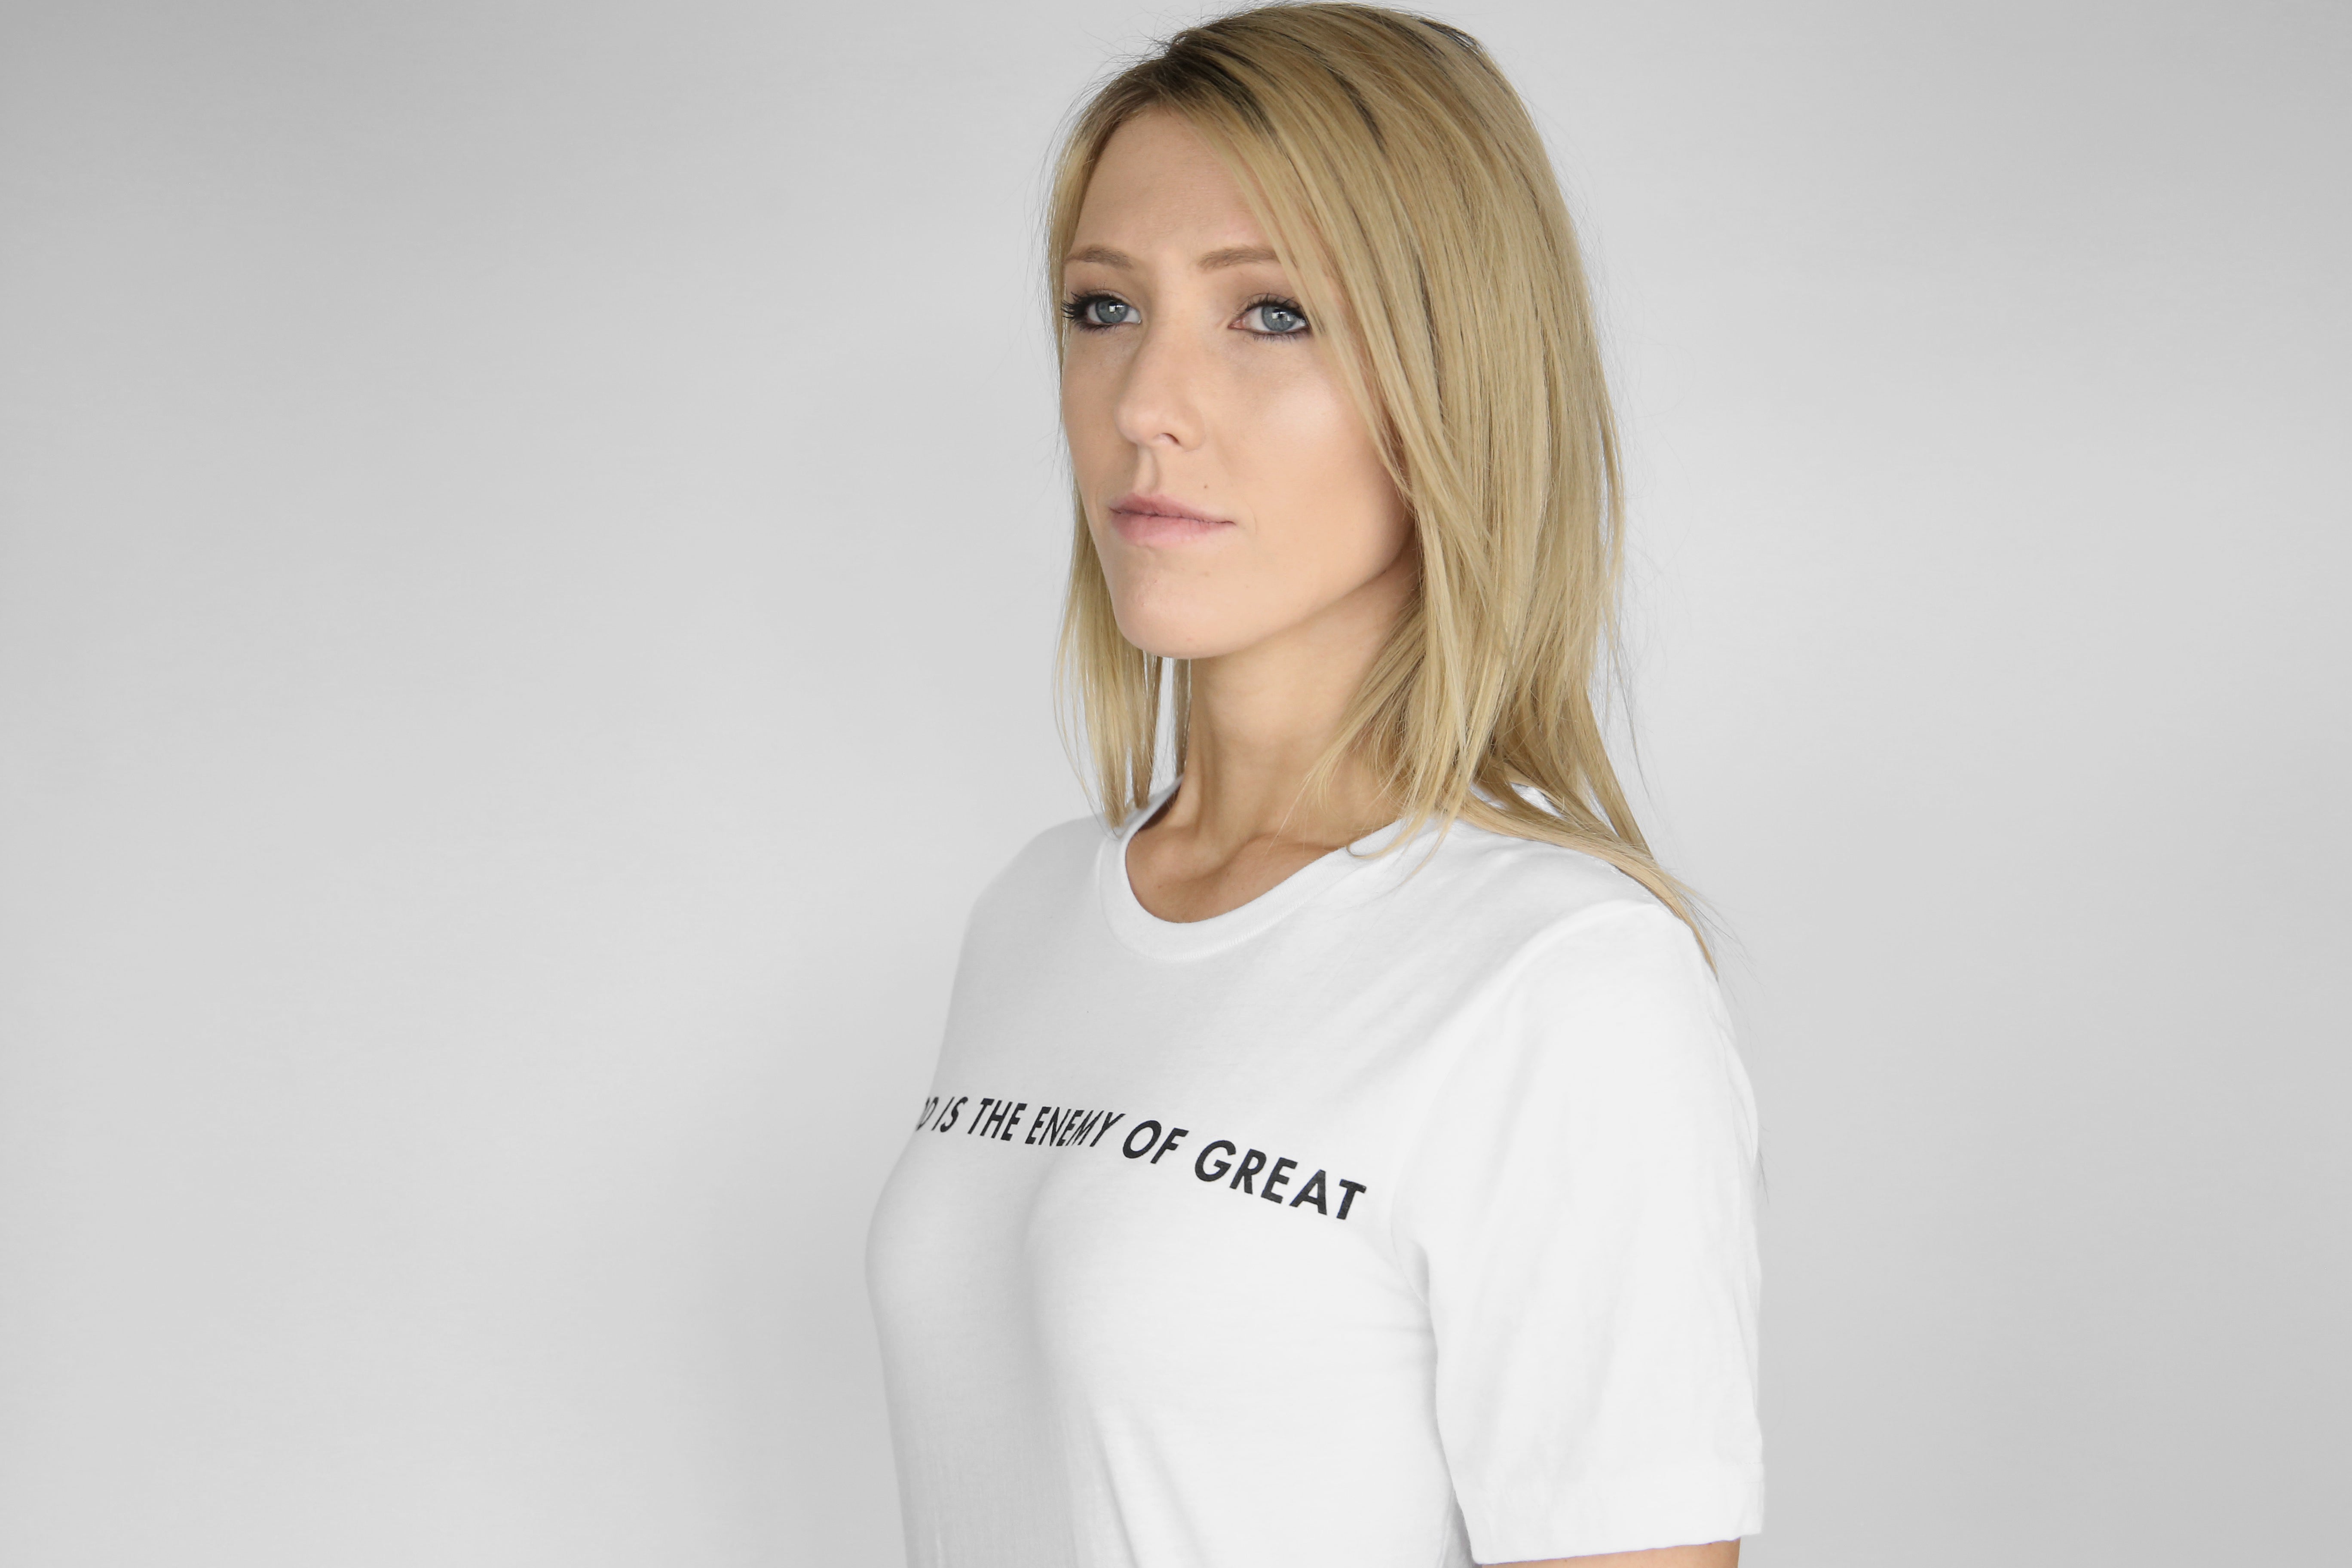 Womens Good Is The Enemy Tee